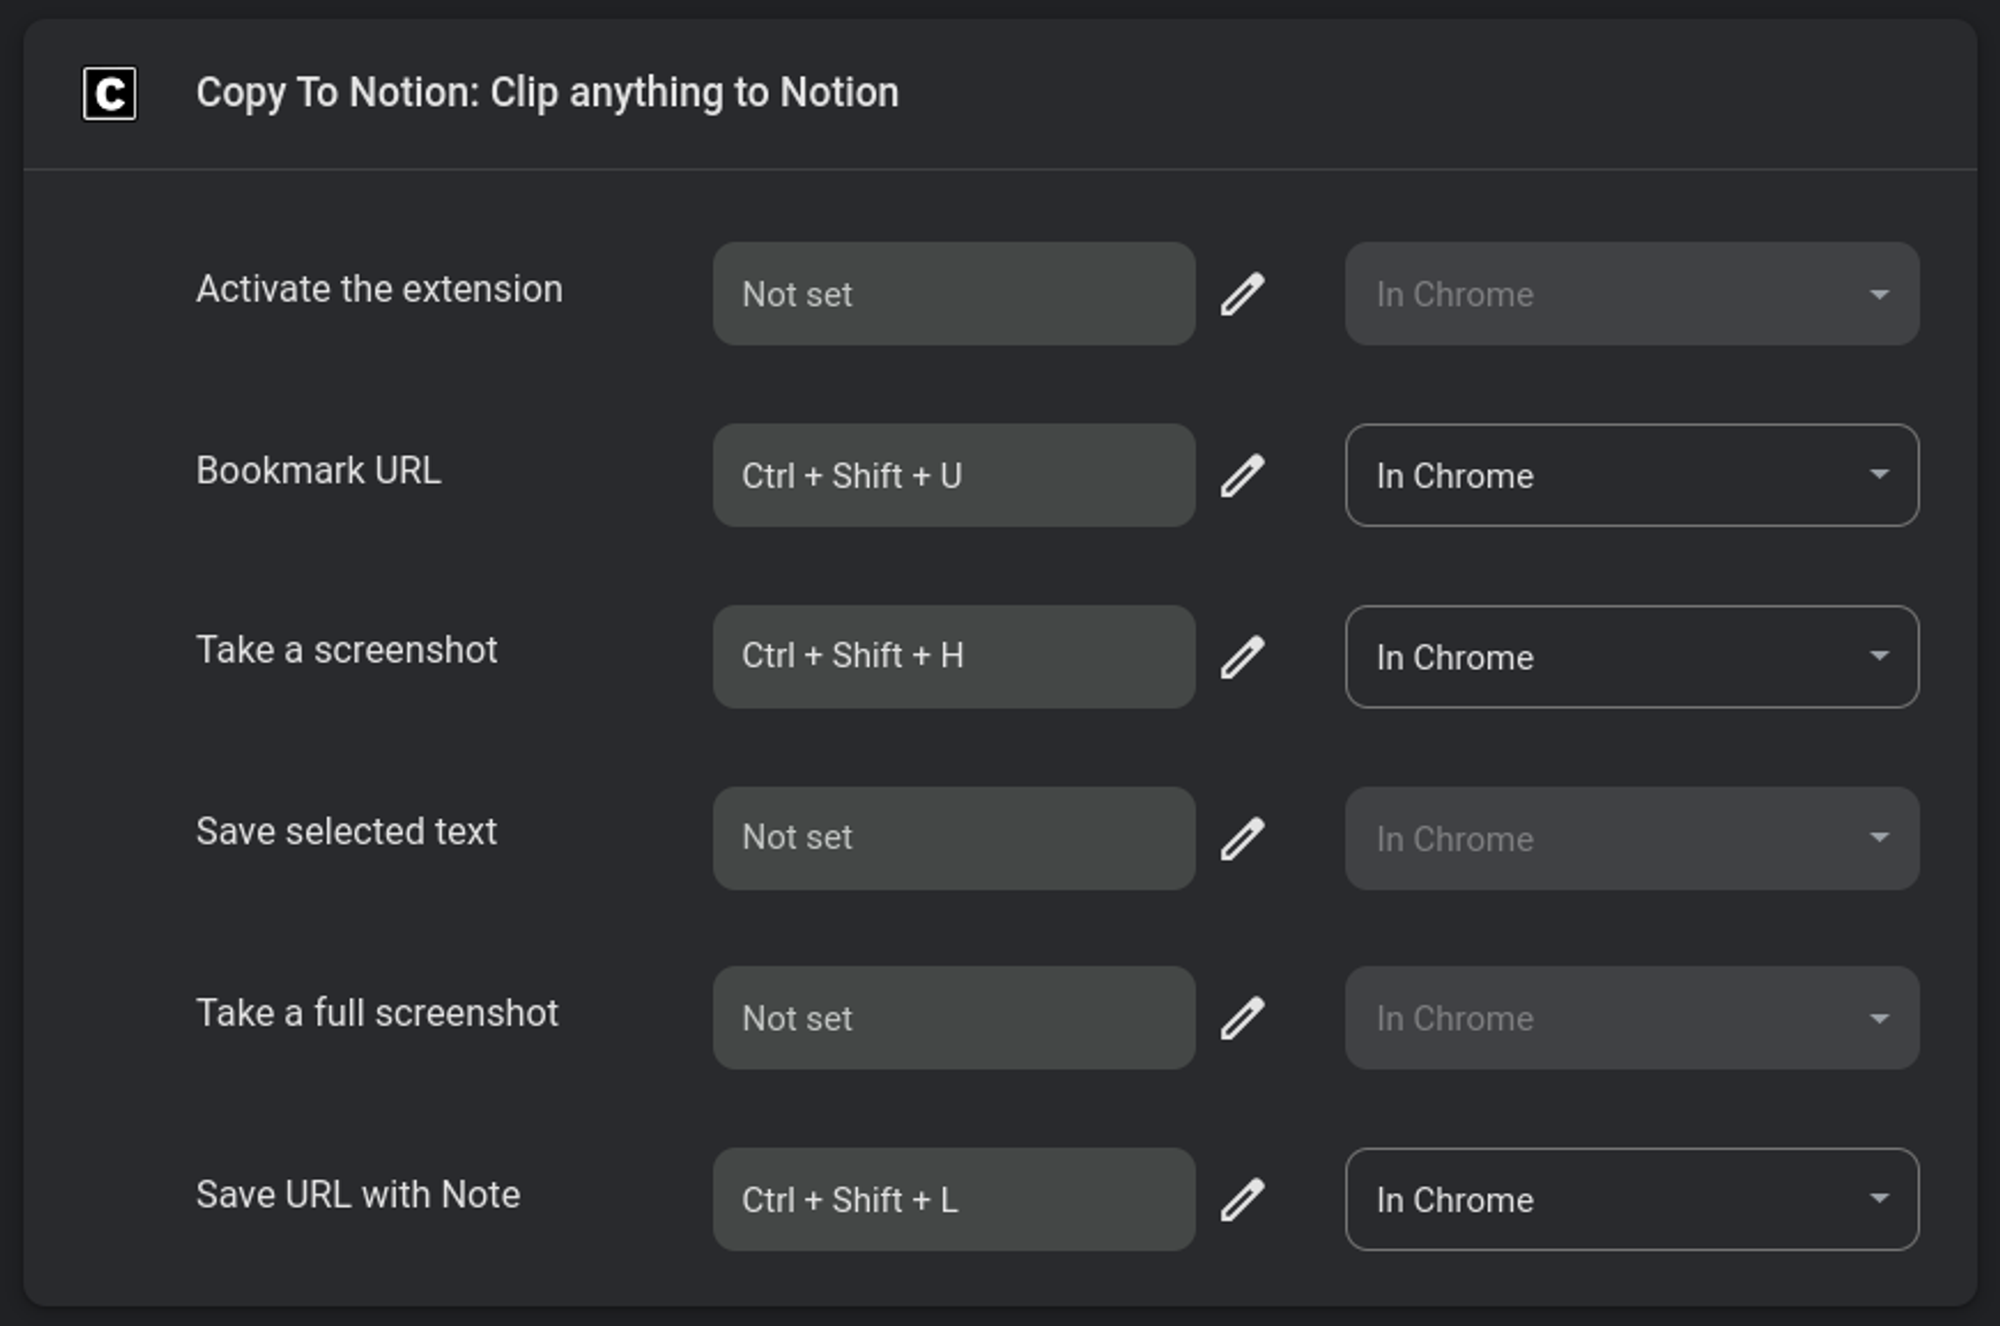 Interface for setting Copy To Notion keyboard shortcuts